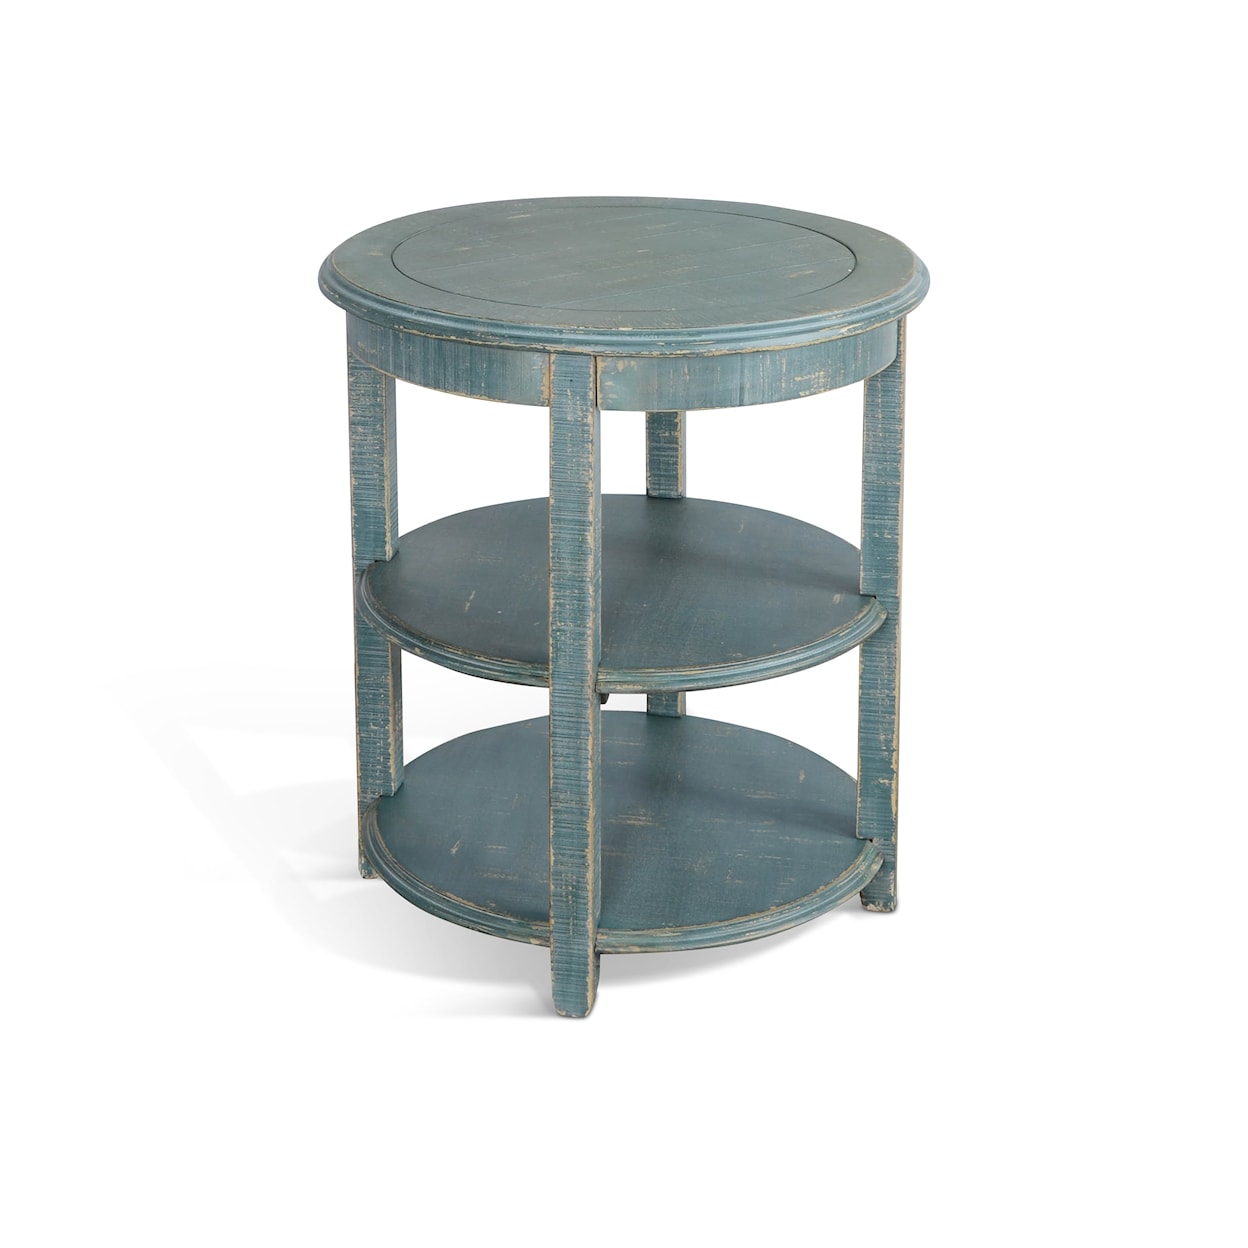 Sunny Designs Marina Round Side Table